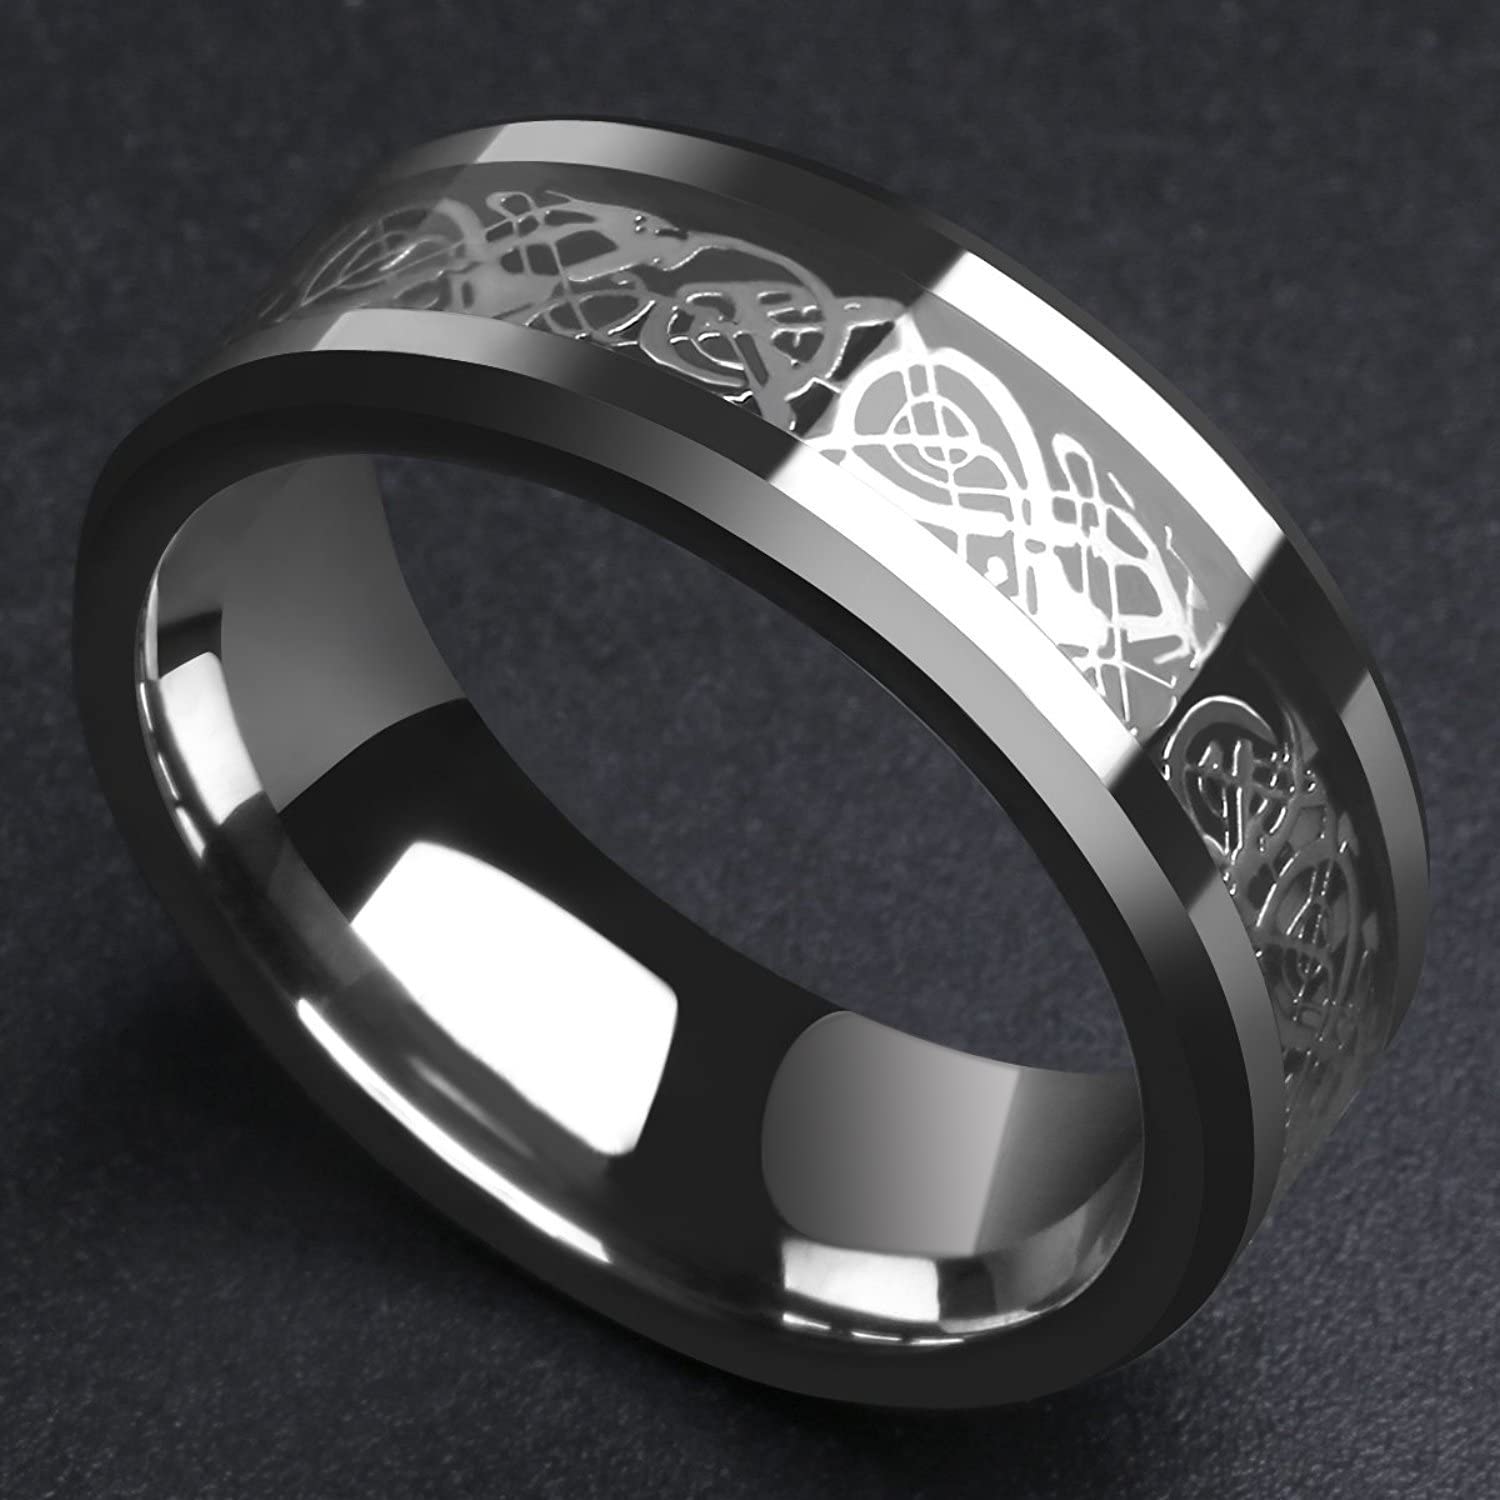 Yellow Chimes Rings for Men Dragon Celtic Inlay Polish Finish Silver Base Titanium Steel Ring for Men and Boys.